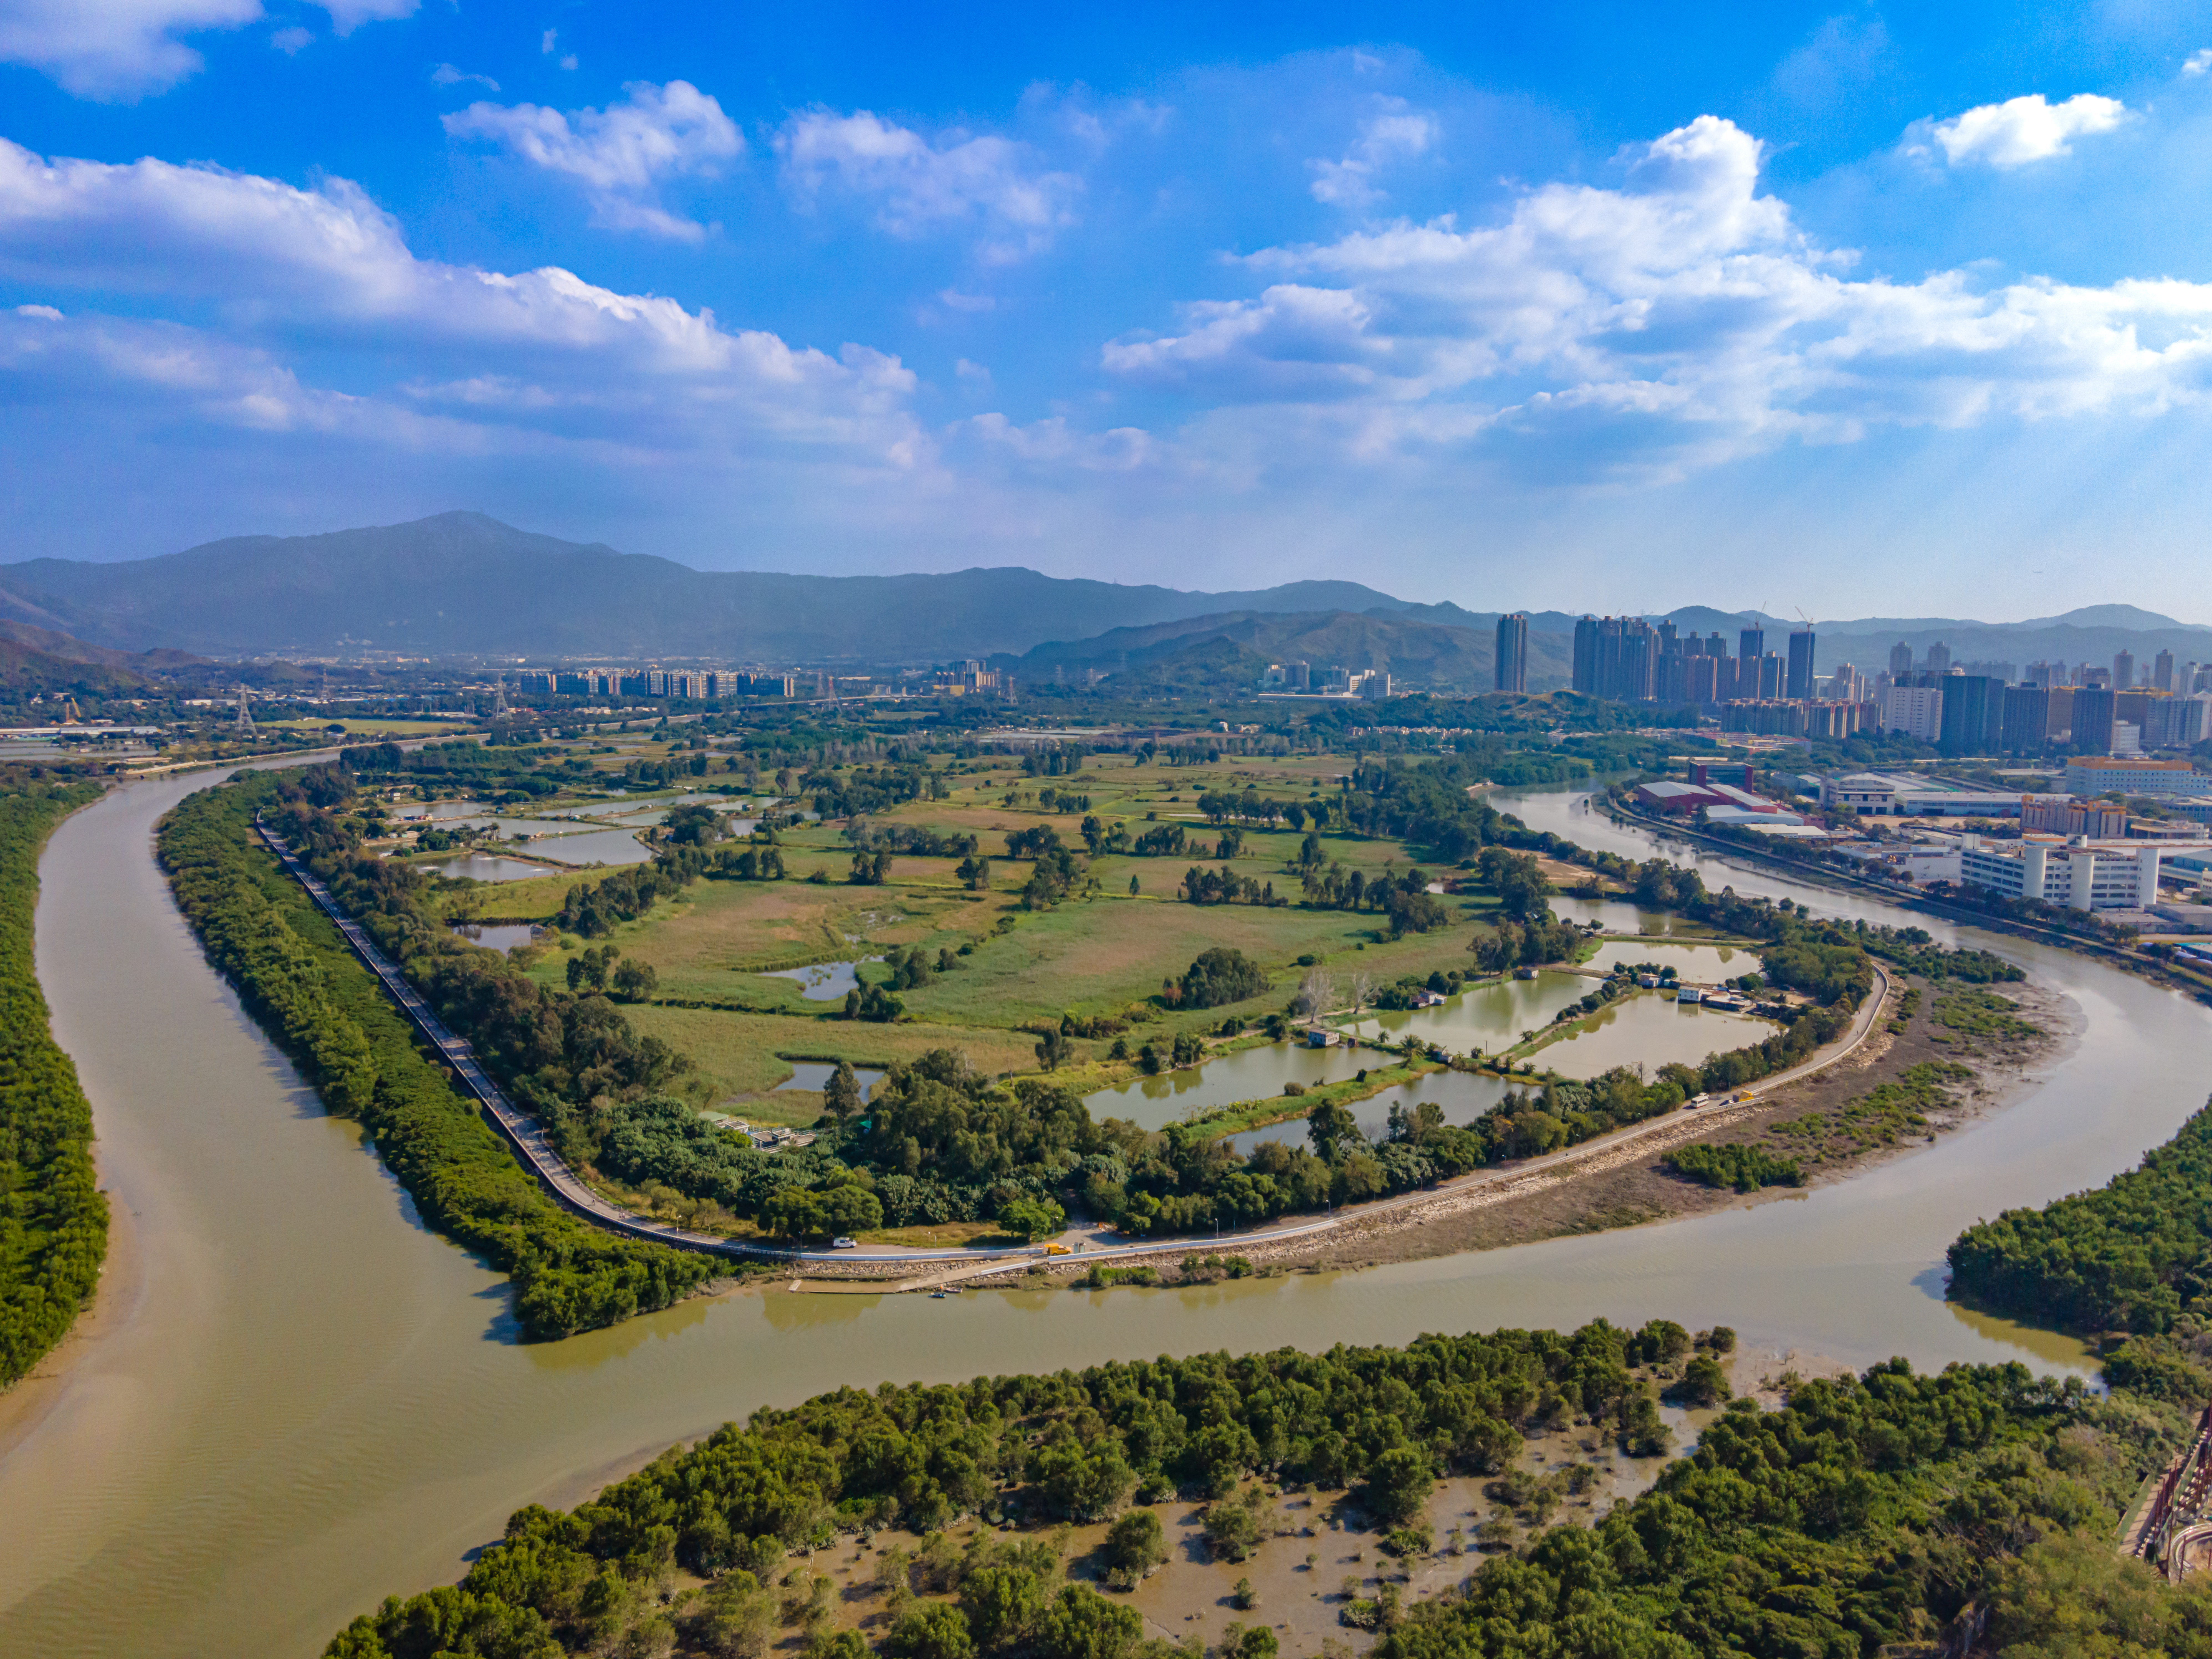 Confluence of Kam Tin River (Left) and Shan Pui River (Right)